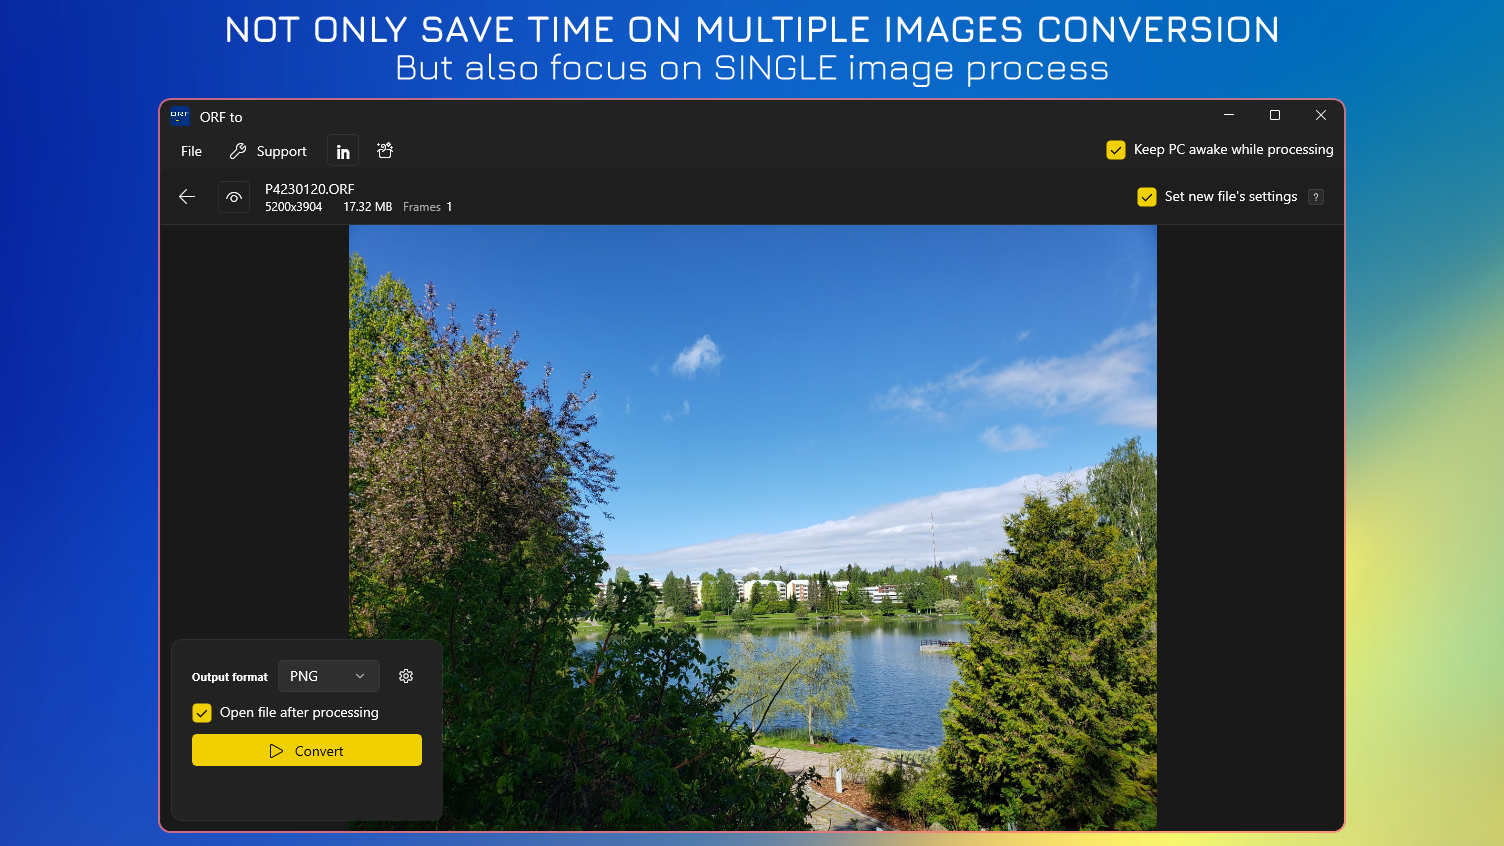 Not Only Save Time in Multiple Images Conversion - But also focus on Single image process.